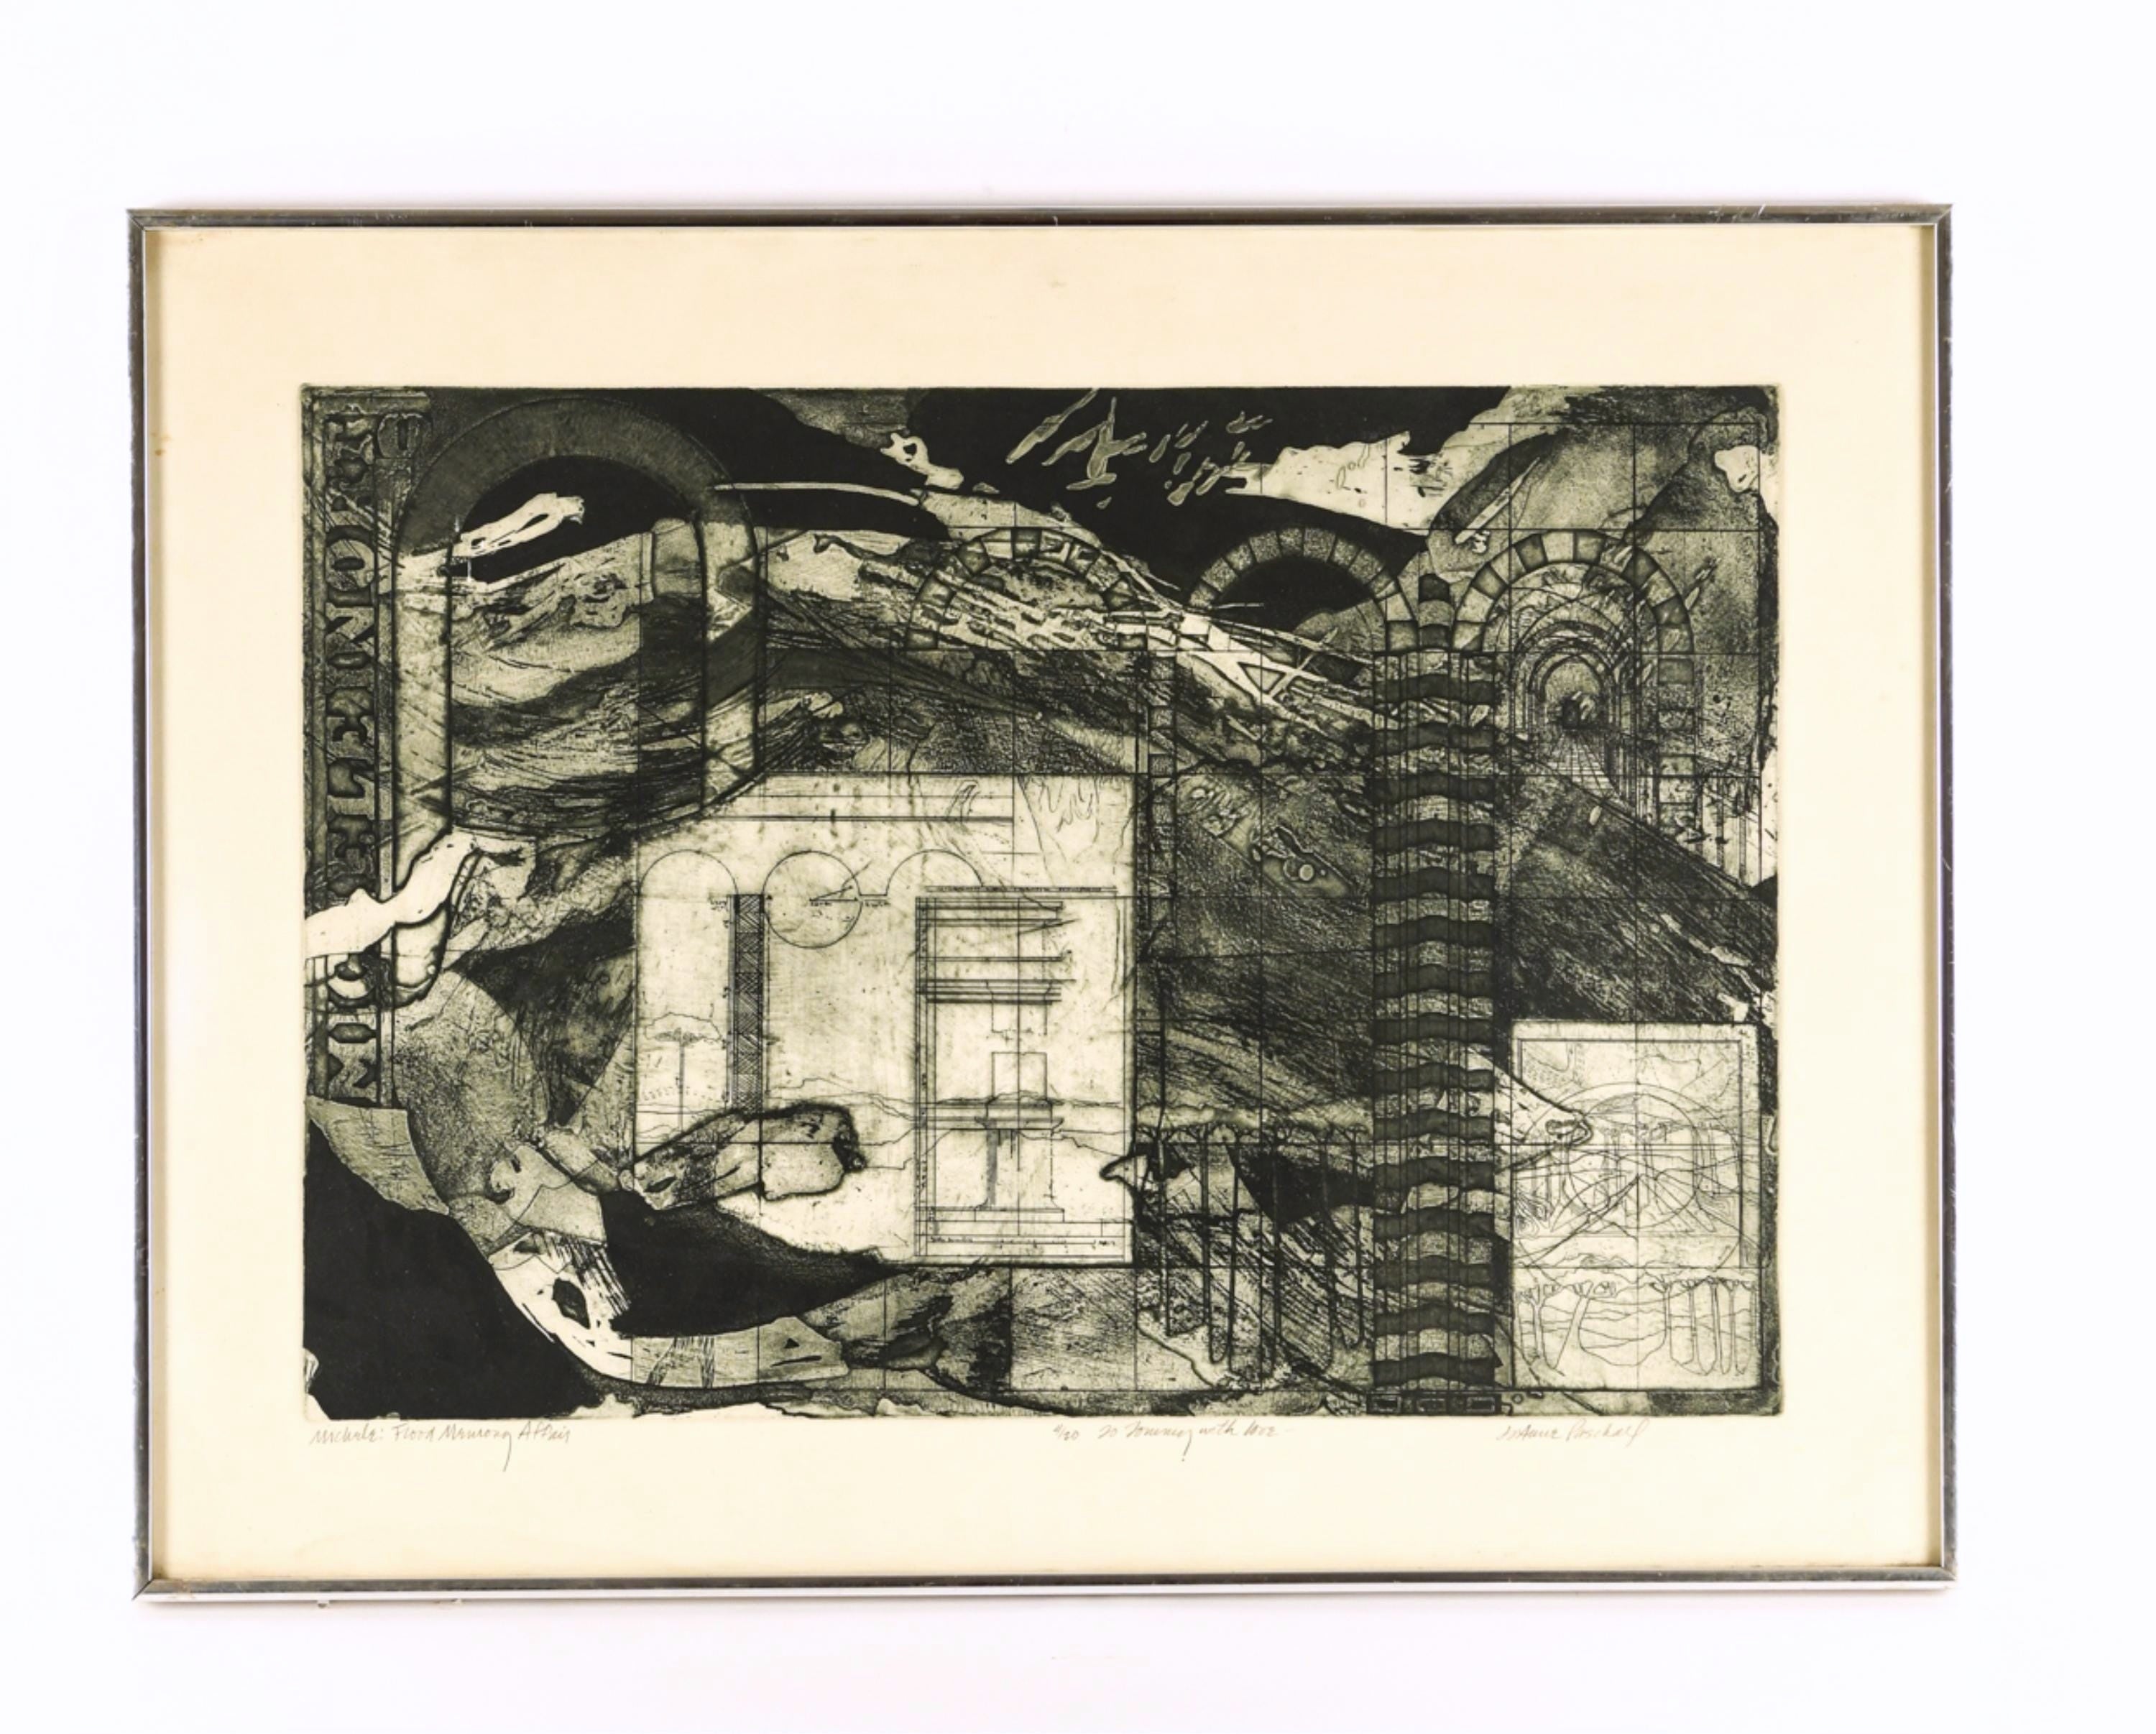 'MICHELE: FLOOD MEMORY AFFAIR' LITHOGRAPH BY JOANNE PASCHALL (1970s)